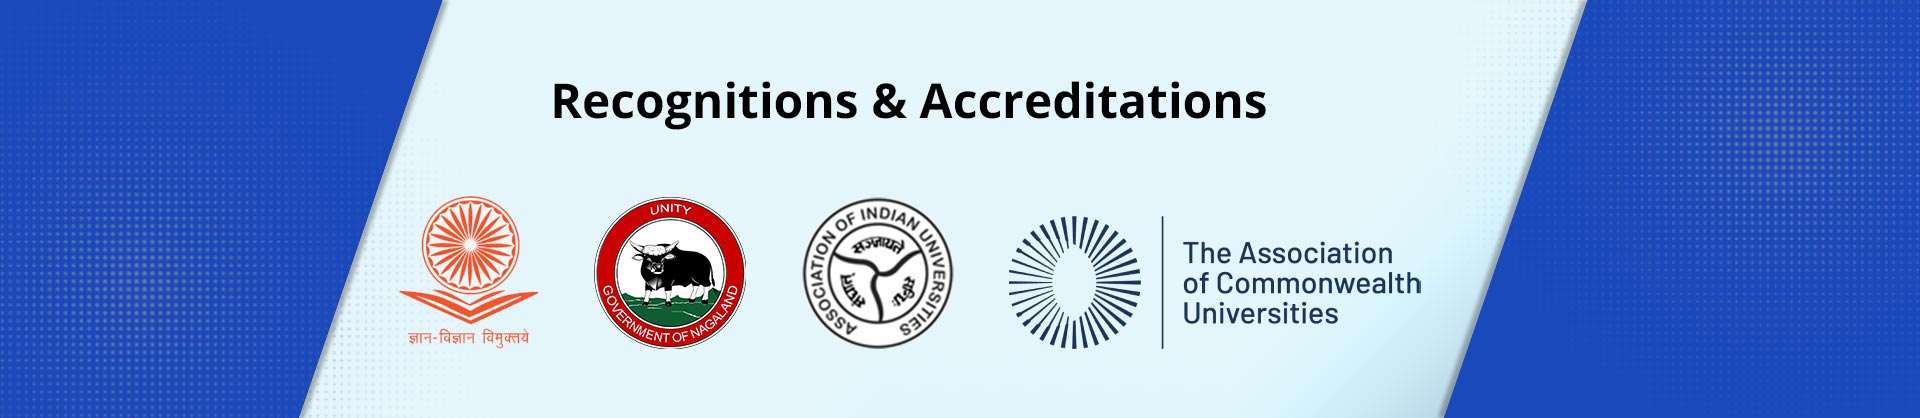 recognitions-accreditations